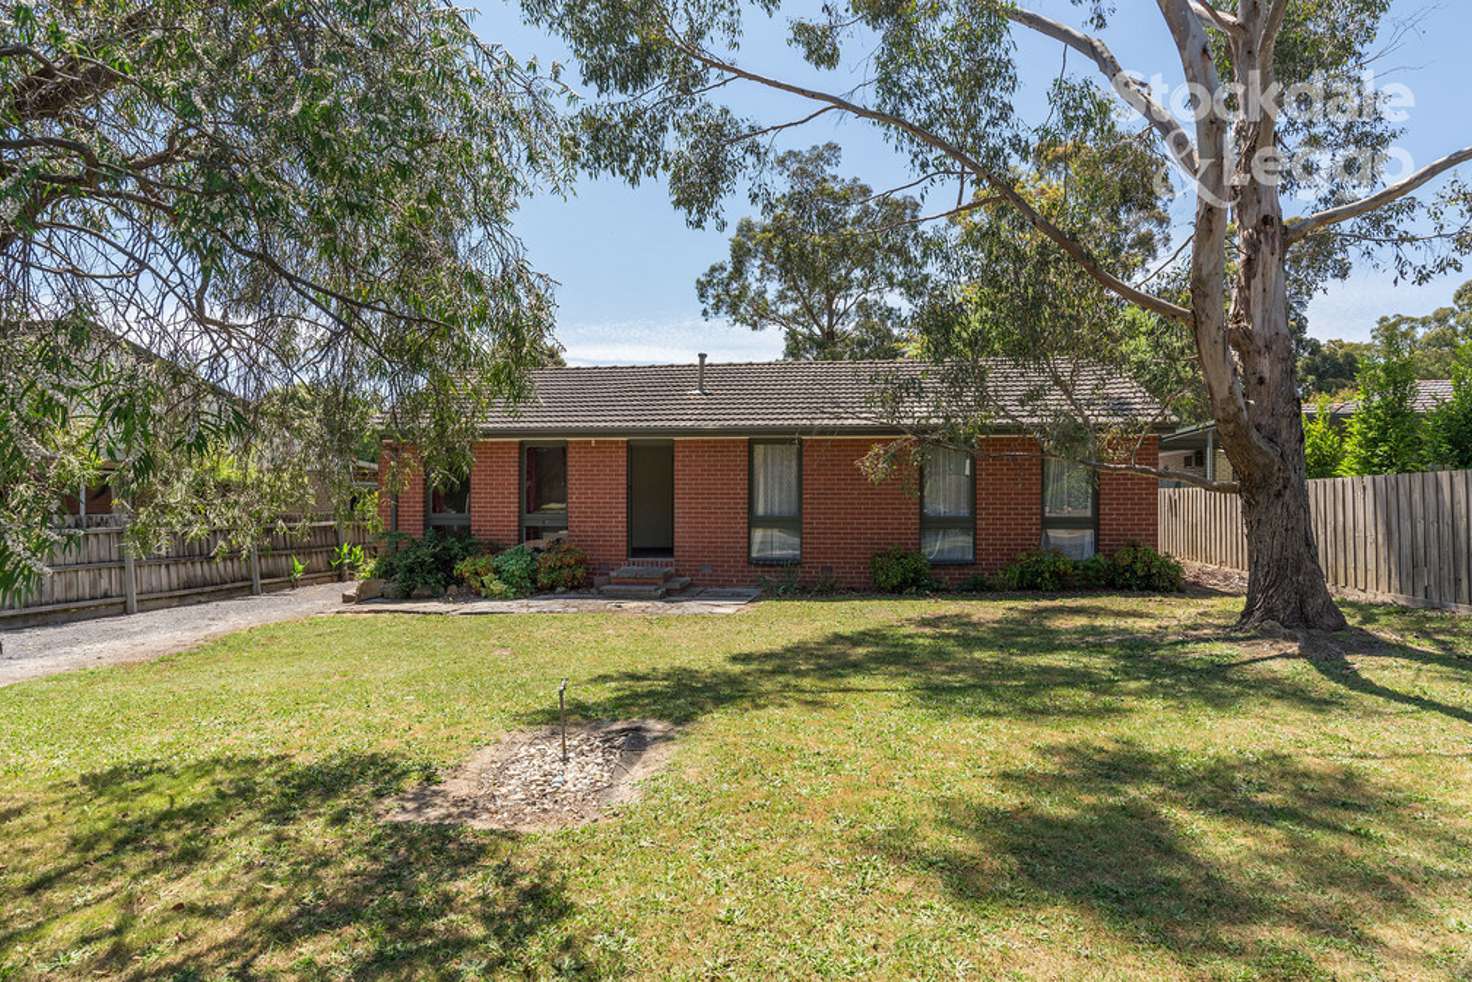 Main view of Homely house listing, 97 Cherylnne Cres, Kilsyth VIC 3137